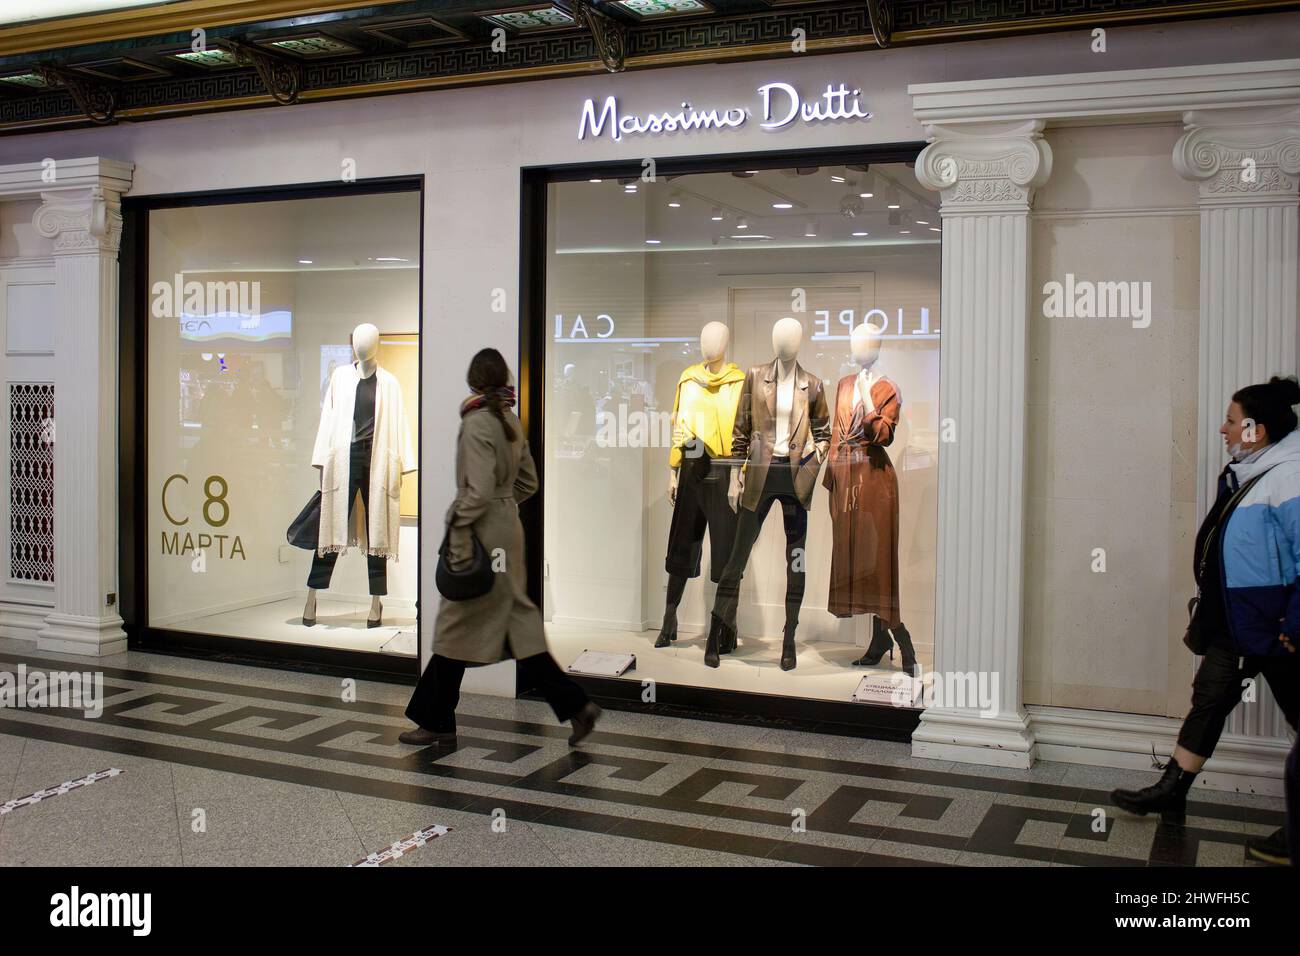 Massimo dutti shop High Resolution Stock Photography and Images - Alamy